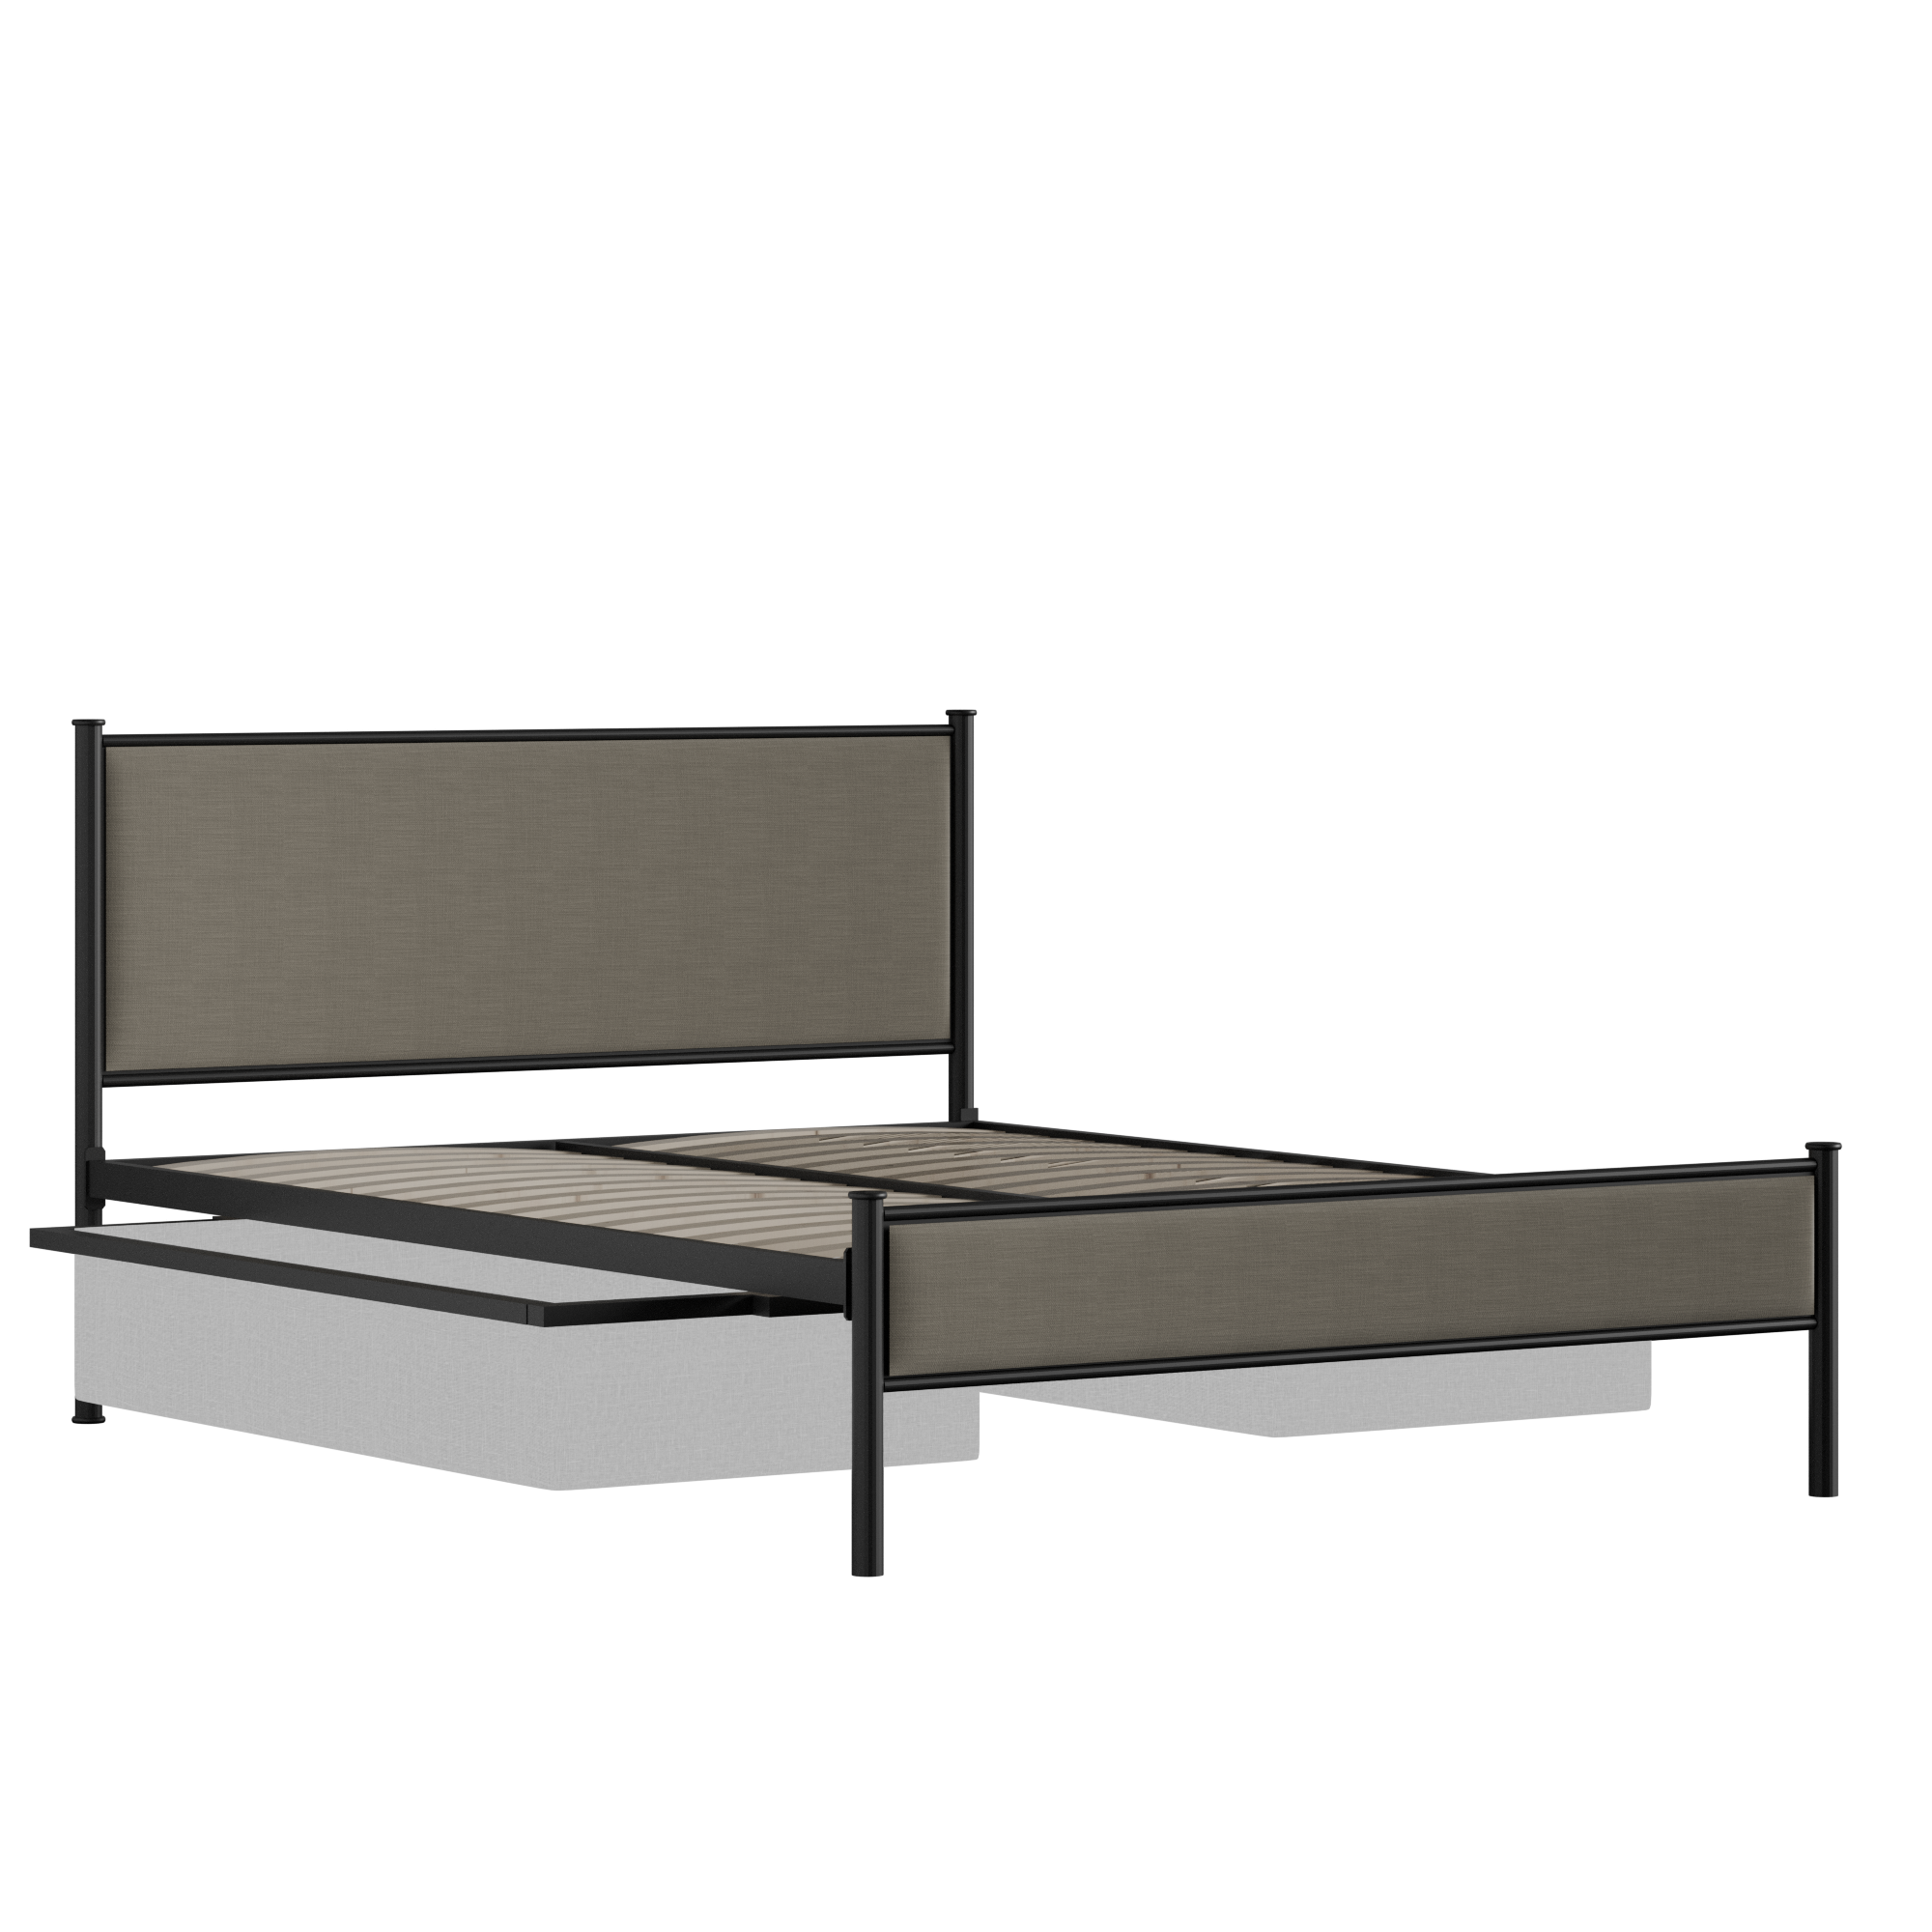 Brest iron/metal upholstered bed in black with drawers